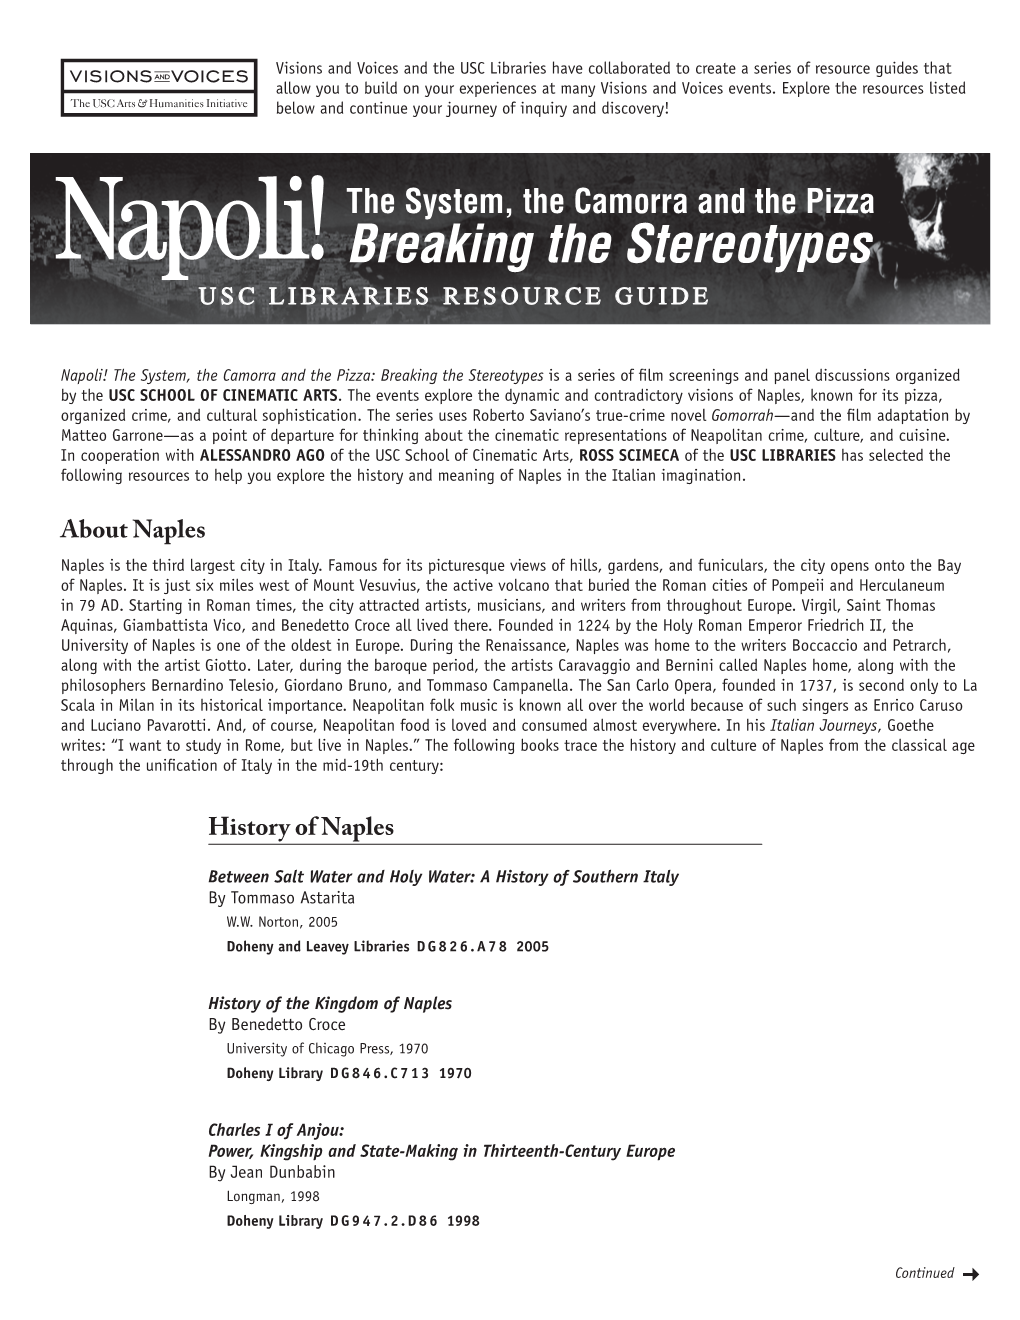 USC Visions & Voices: Napoli! the System, the Camorra and the Pizza